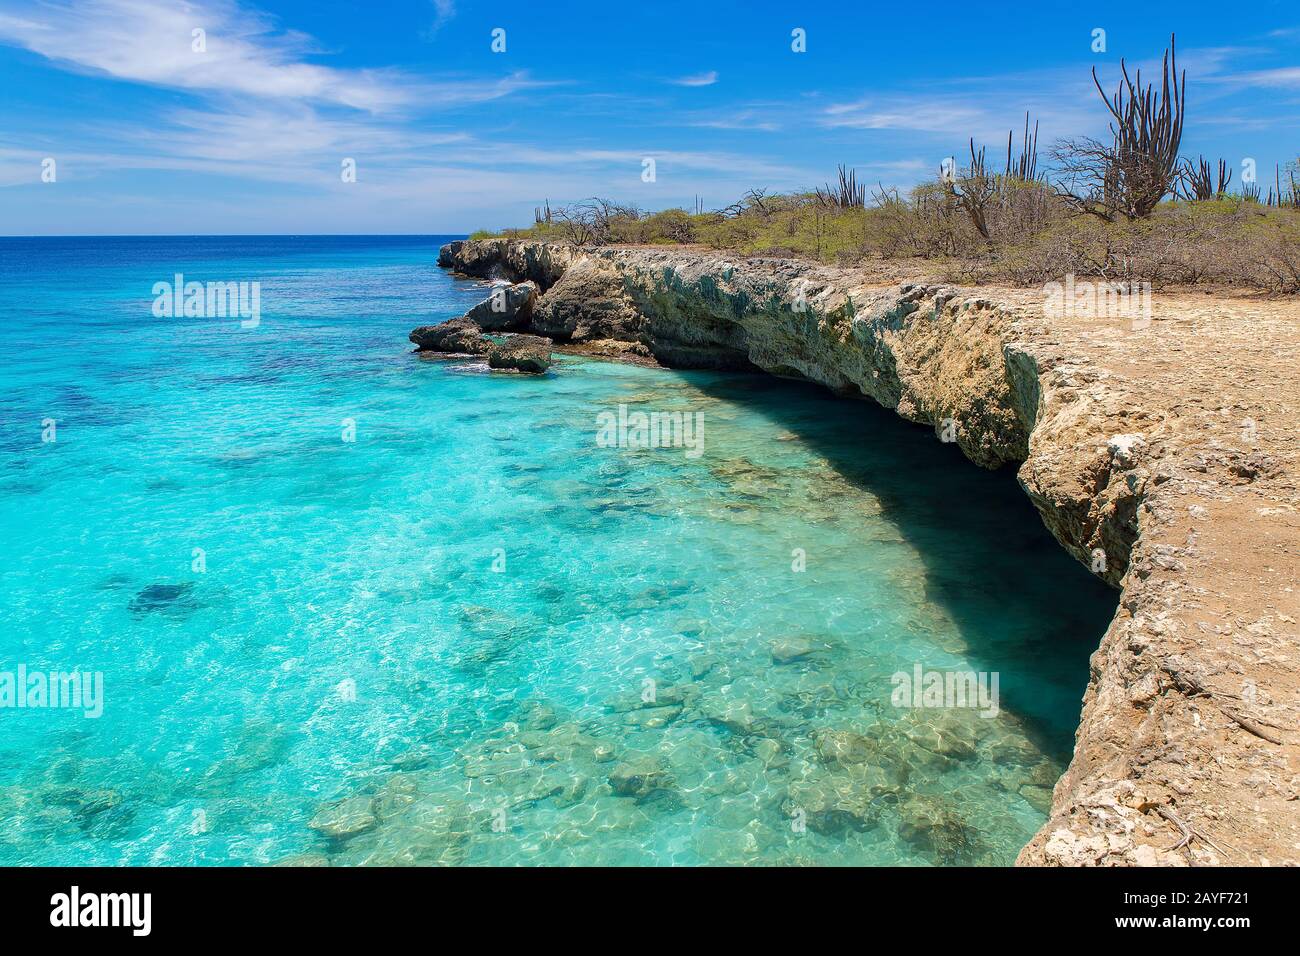 Rocky coast with shallow water in blue sea Stock Photo